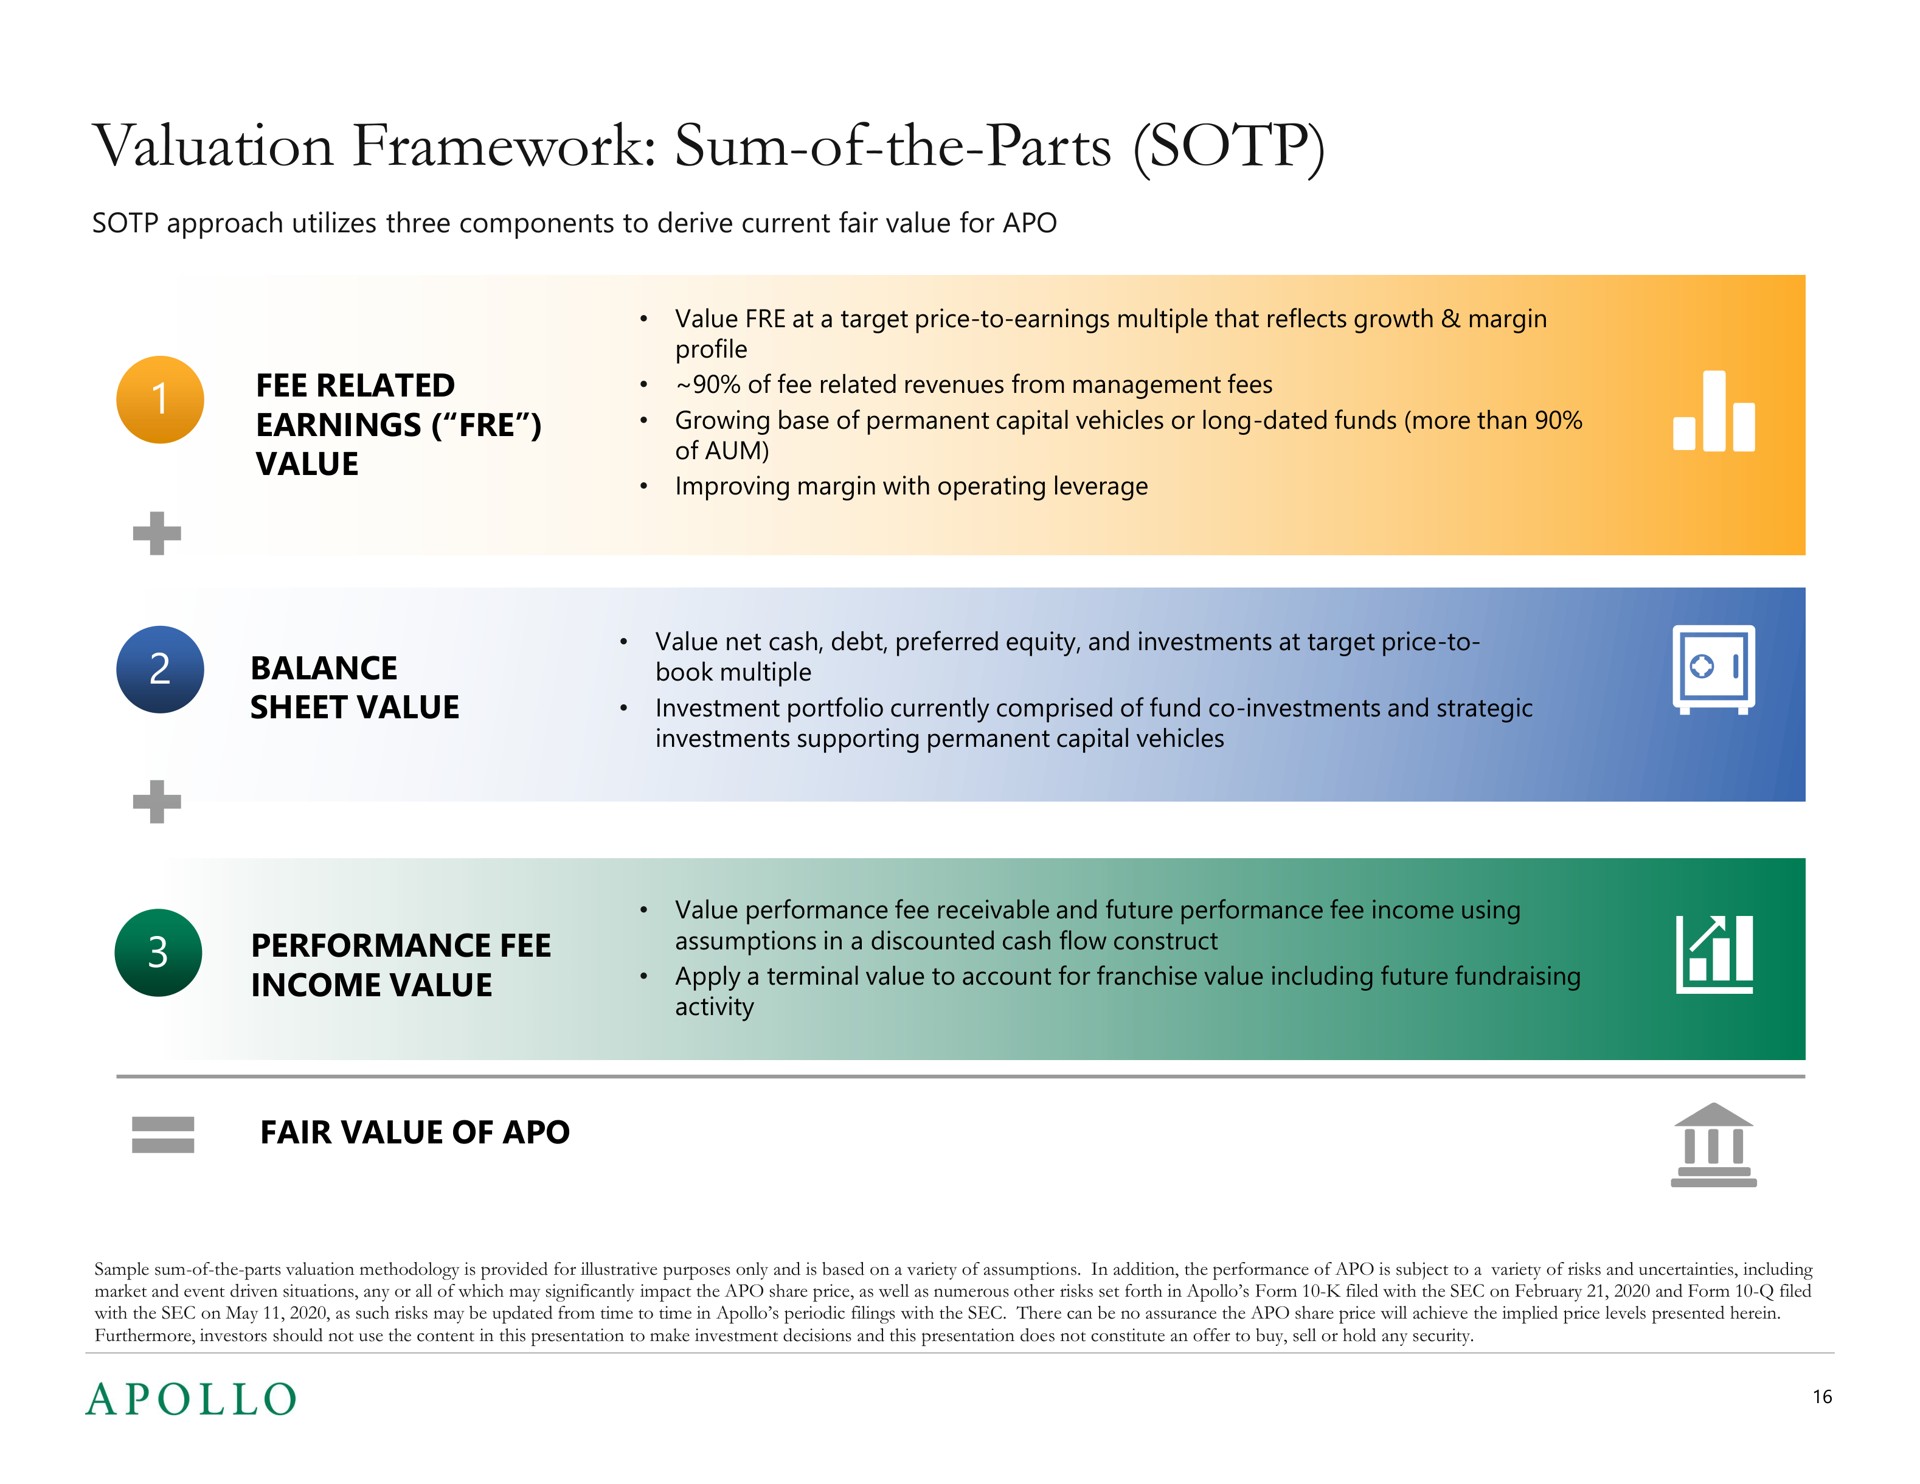 valuation framework sum of the parts | Apollo Global Management